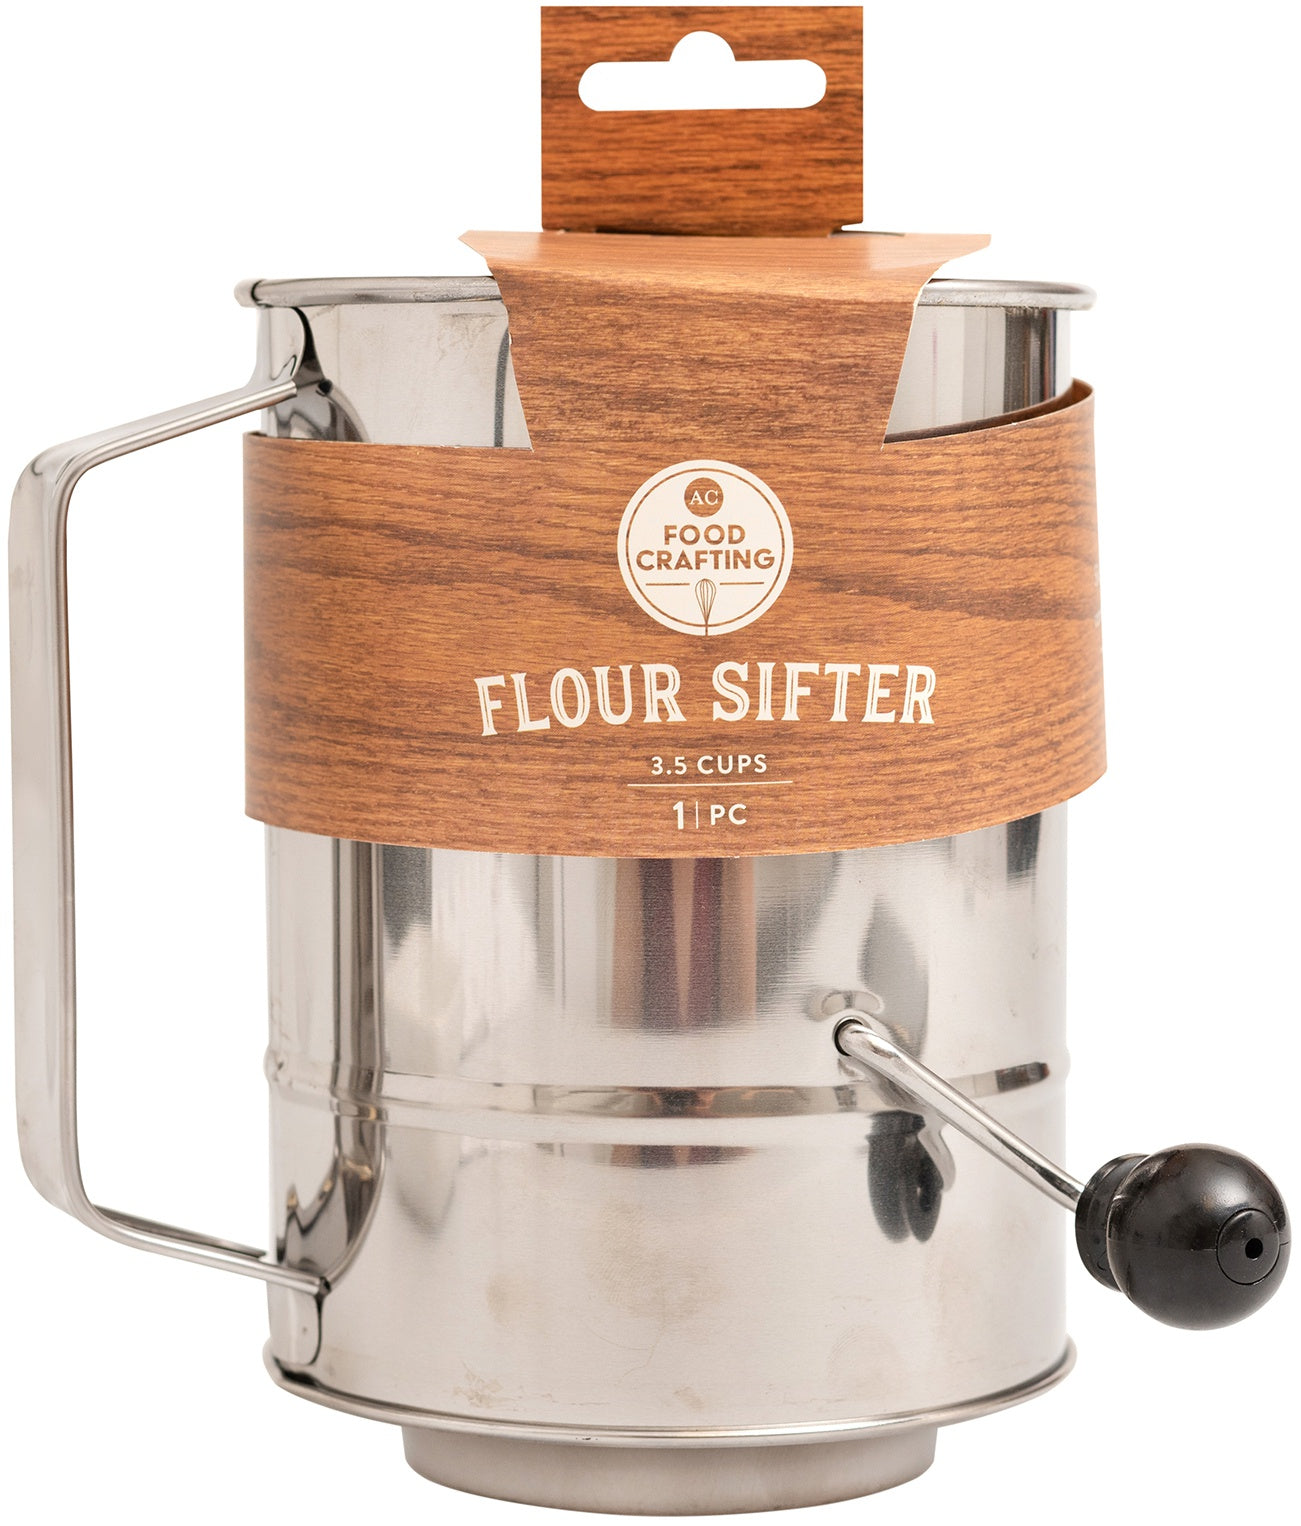 AC Food Crafting Flour Sifter